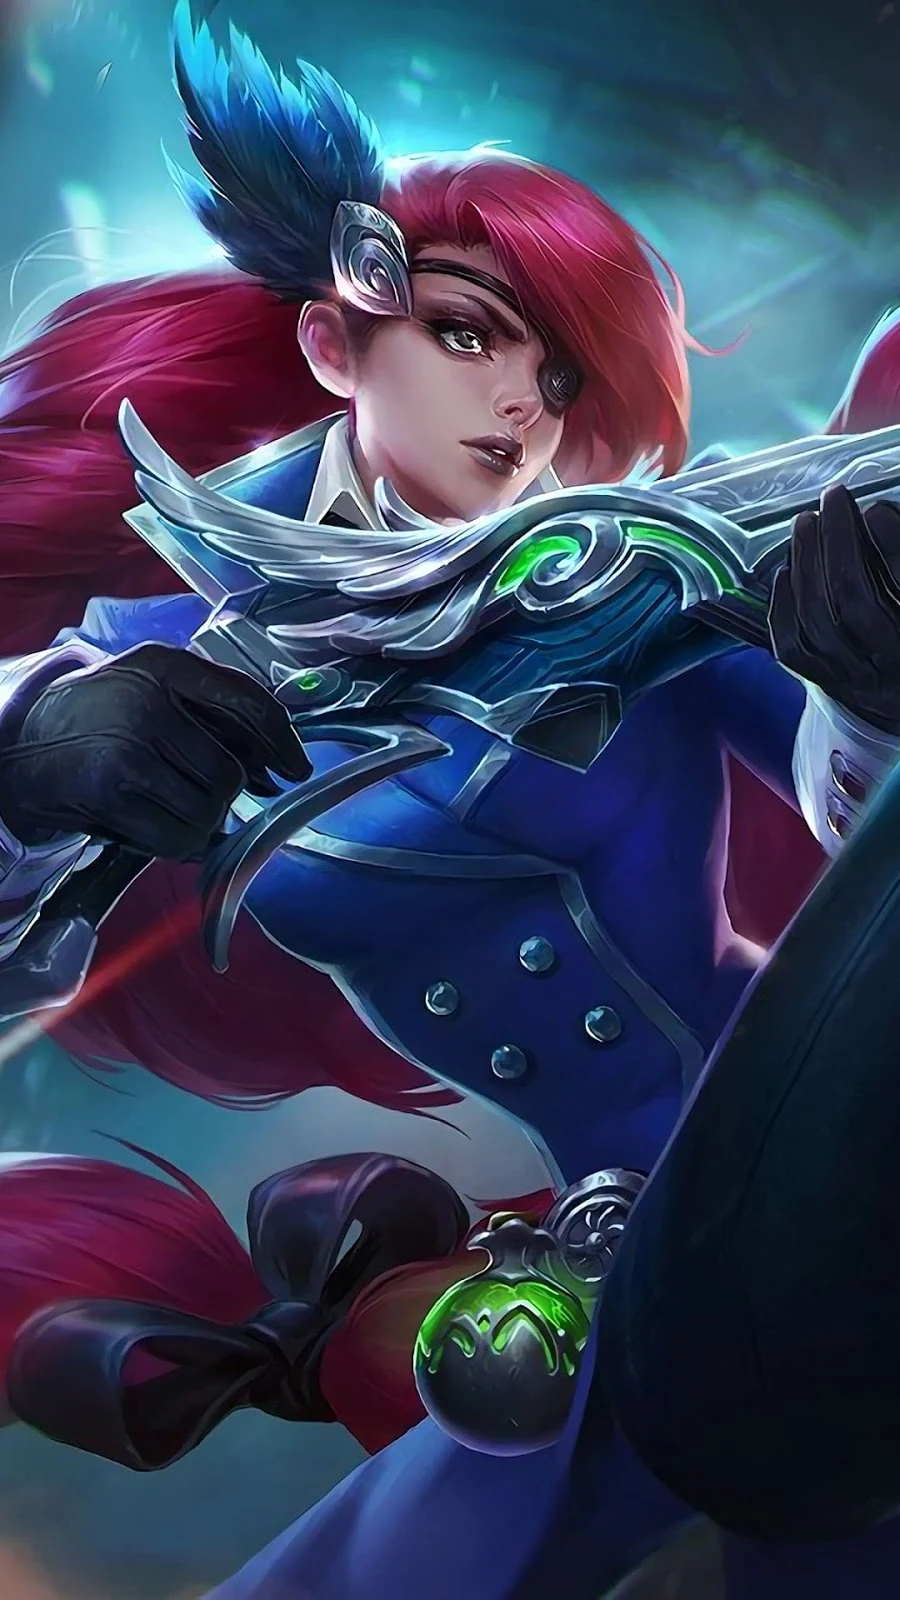 Picture#59 10+ Wallpaper Lesley Mobile Legends (ML) Full HD for PC, Android & iOS